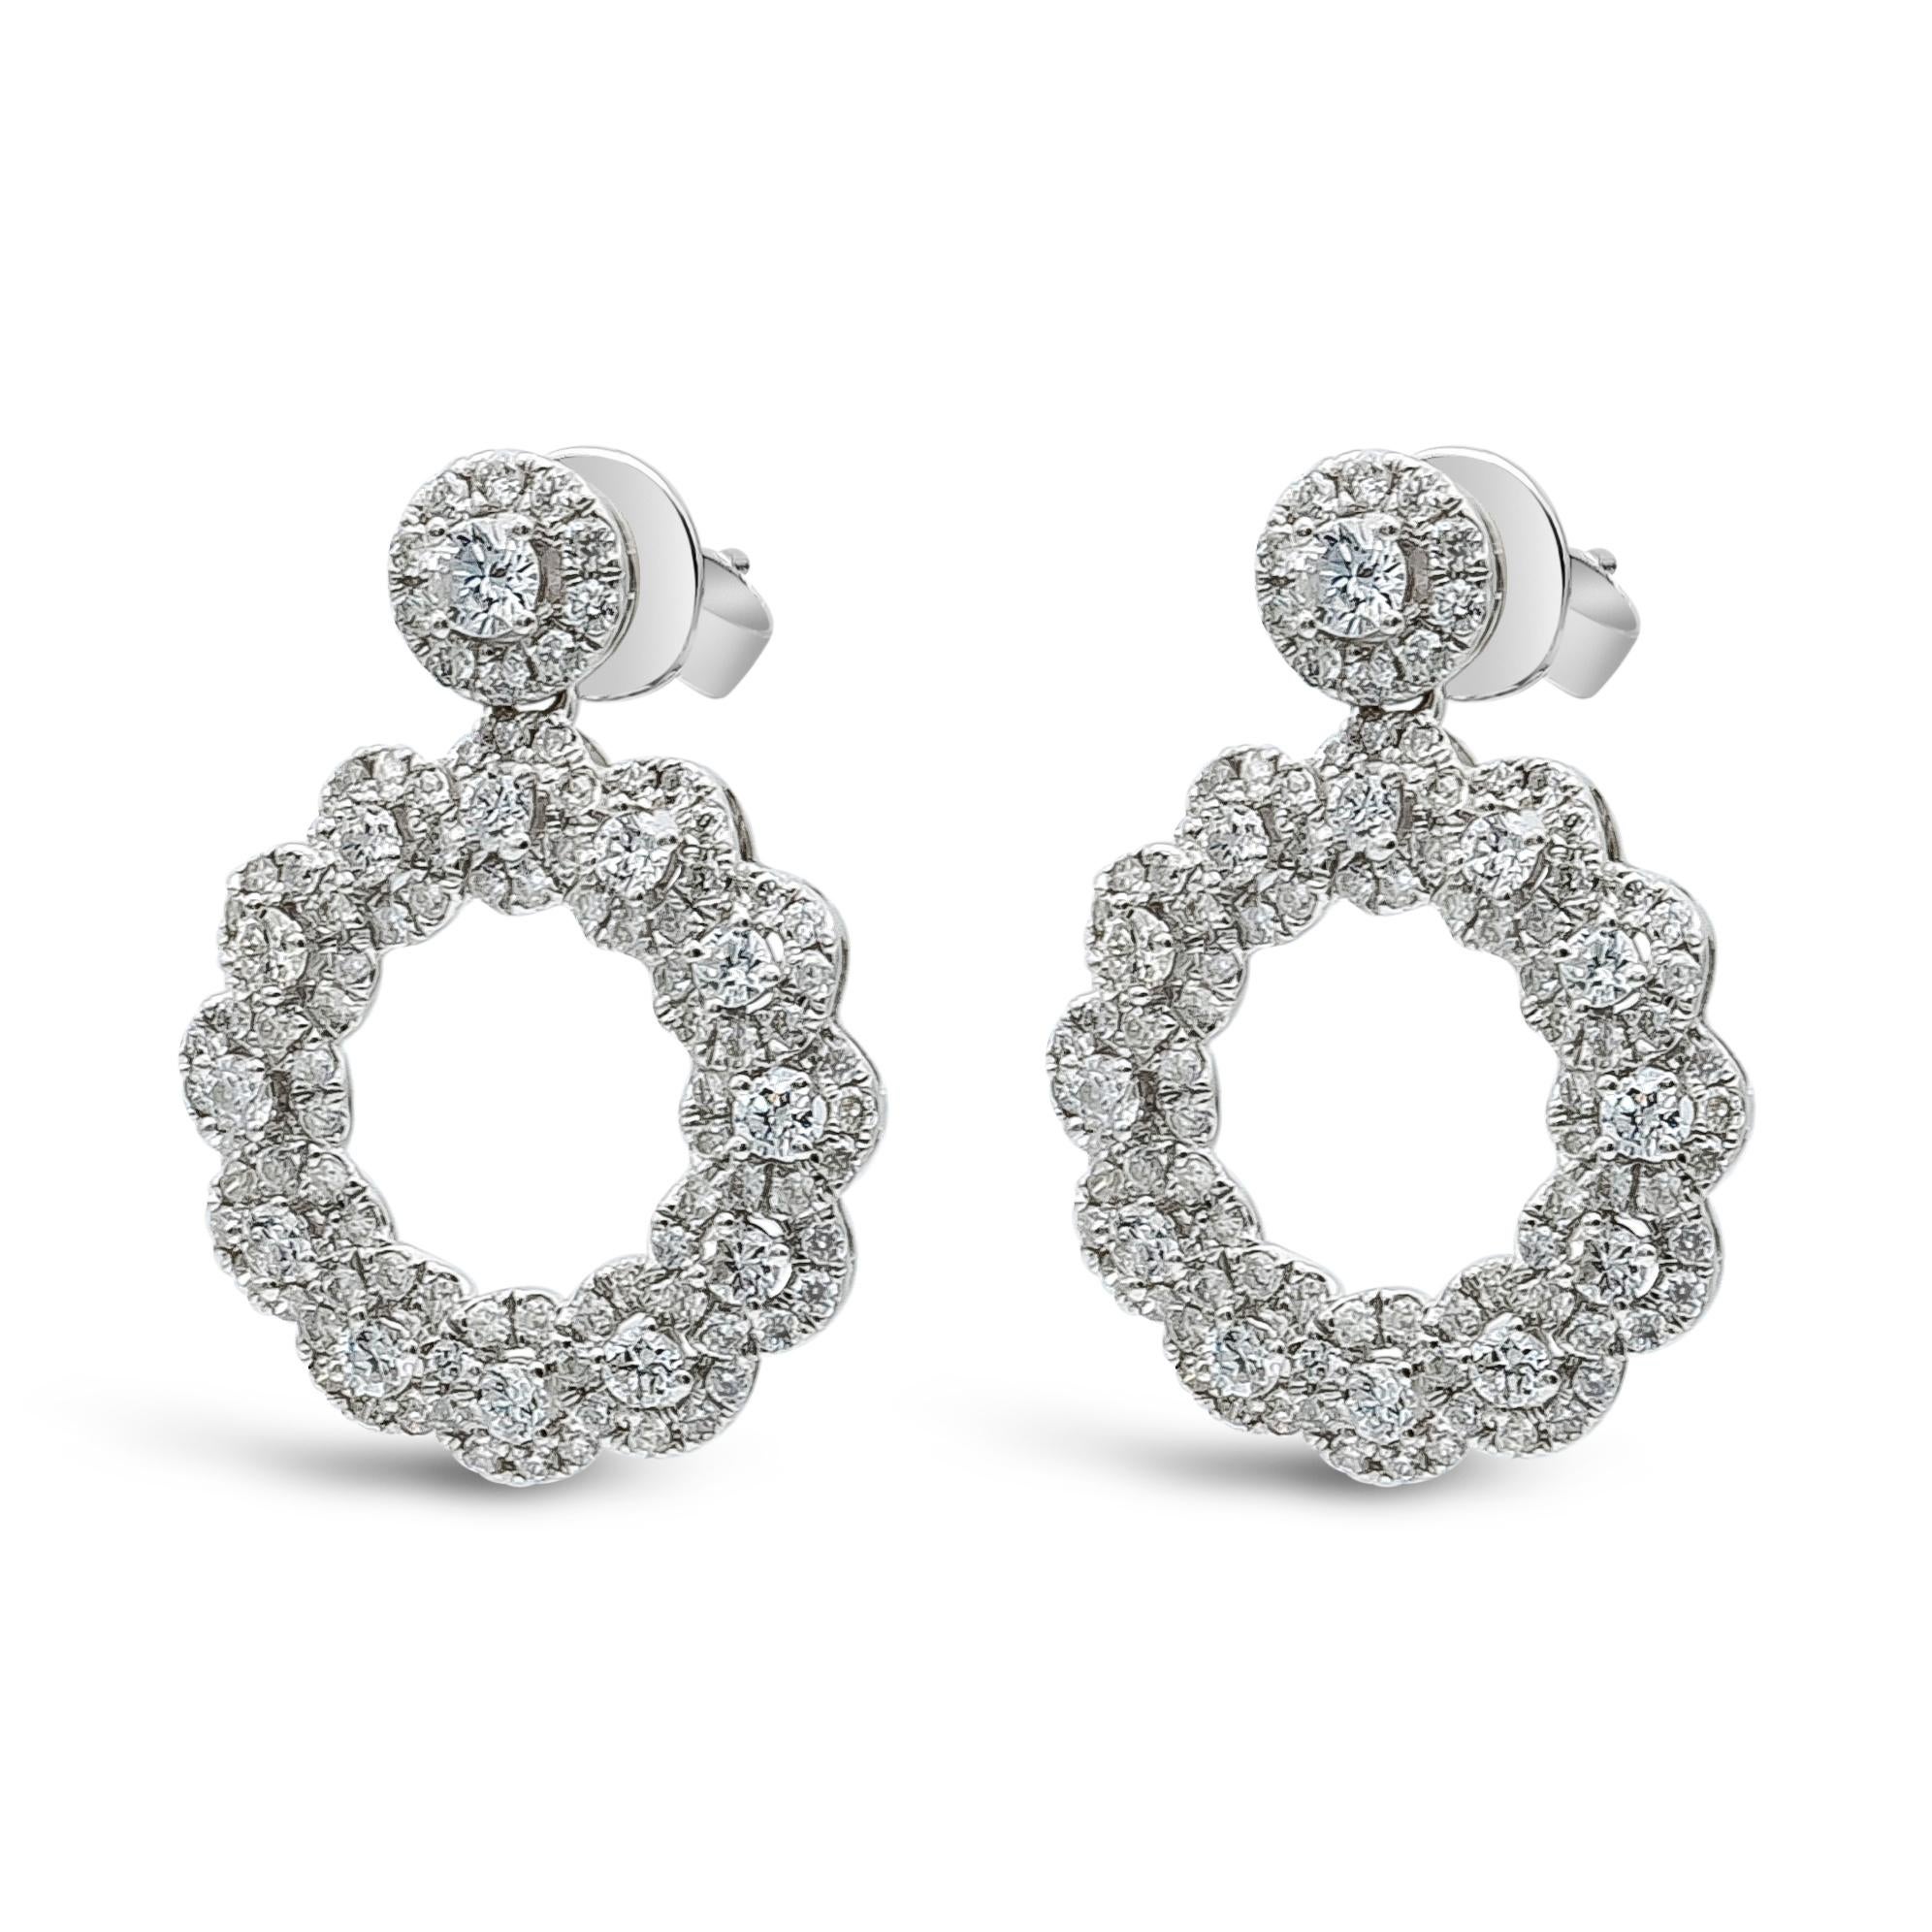 A classy and unique  dangle earrings showcasing 1.42 carat total, 214 pieces of brilliant round cut diamonds, F-G color and VS-SI in clarity. Set in a fashionable open-work circular design and finely made in 18k White Gold. 

Style available in